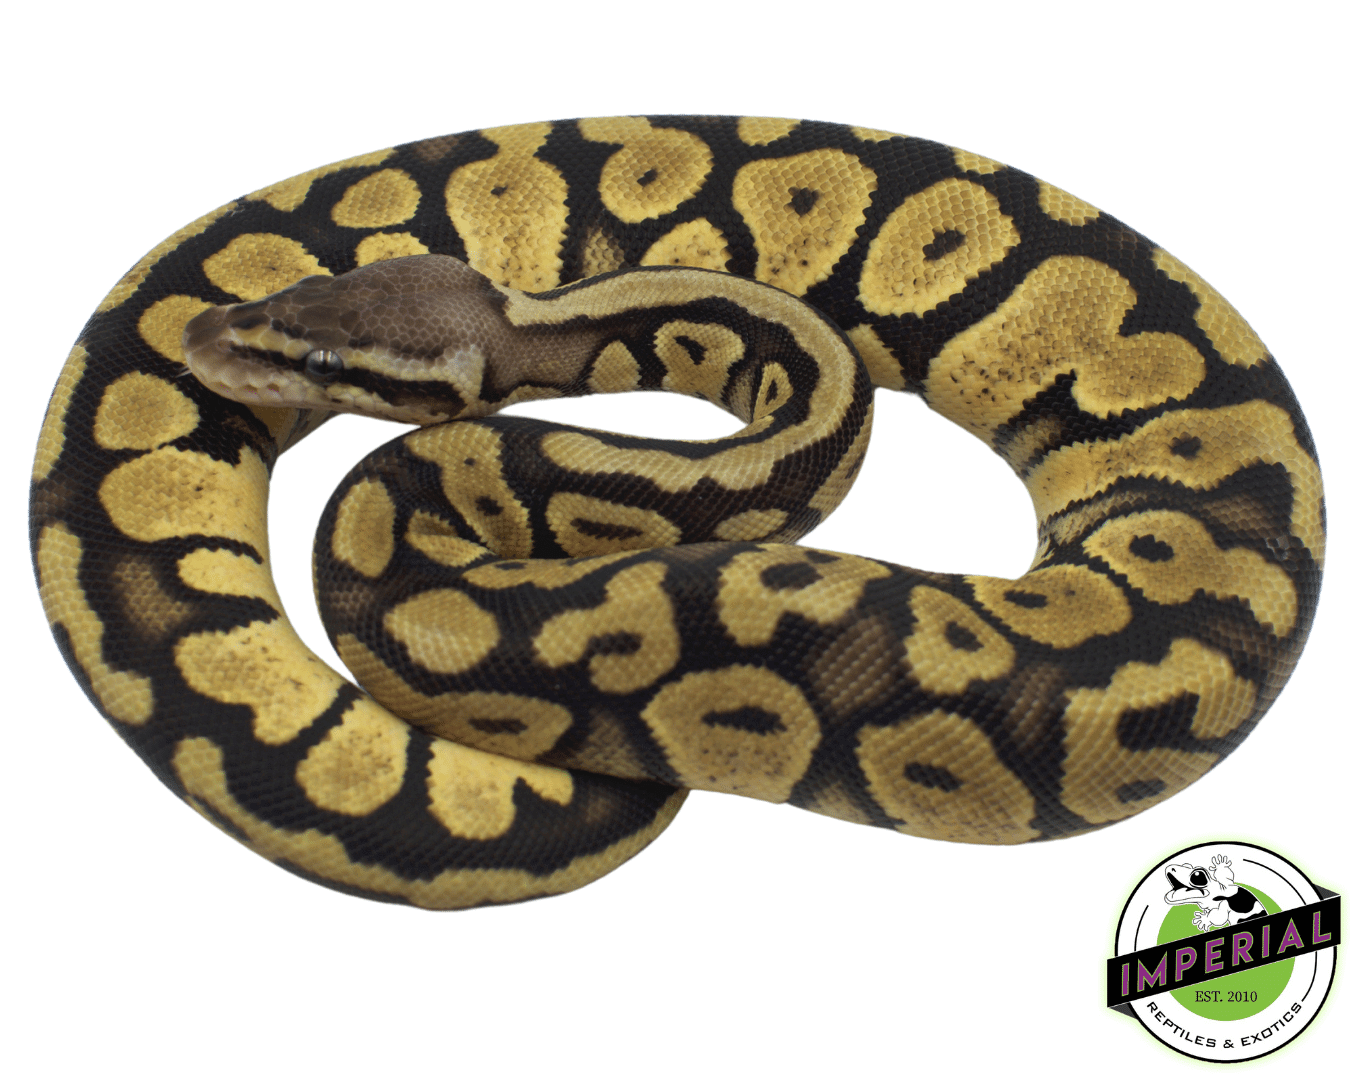 firefly yellowbelly ball python for sale online, buy ball pythons near me